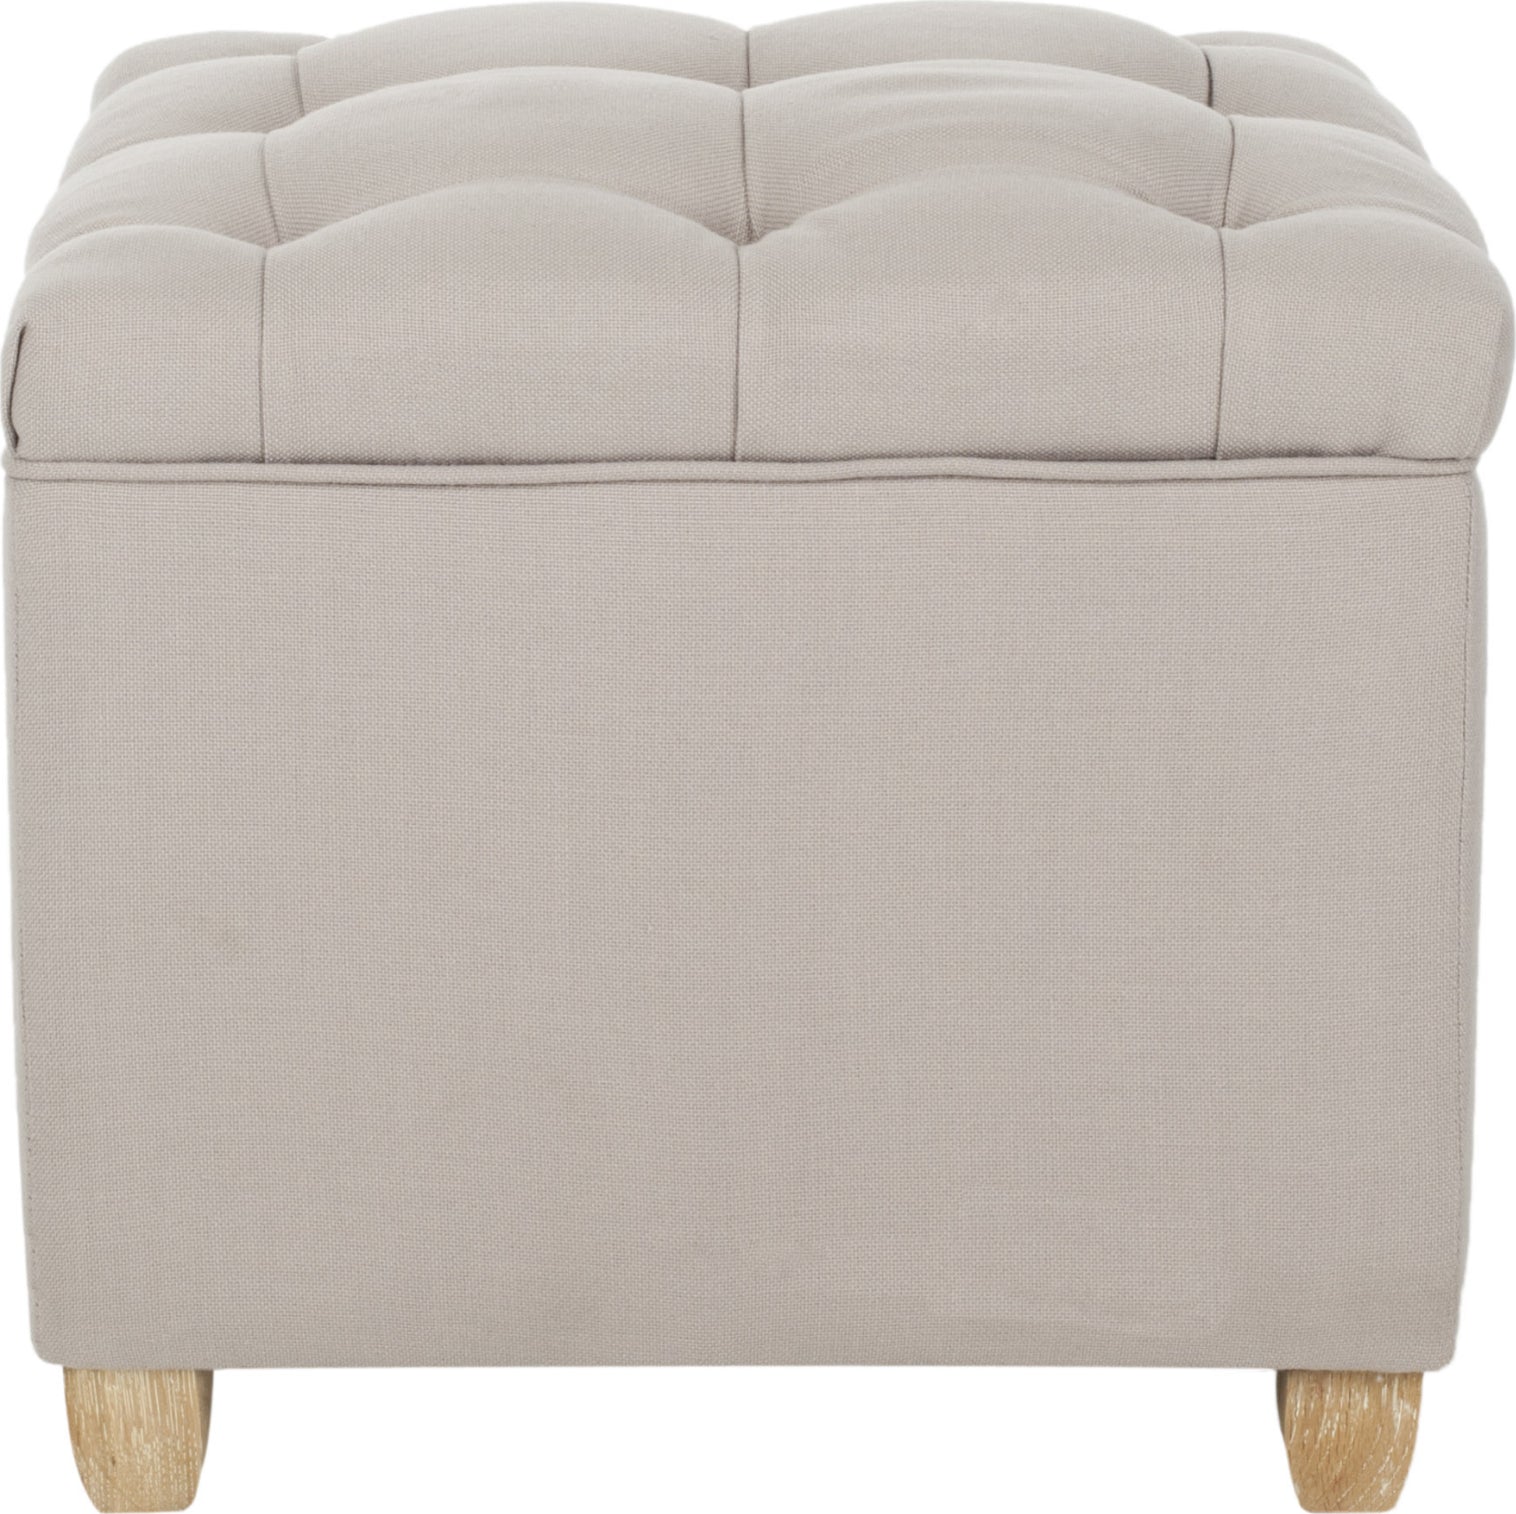 Safavieh Joanie Tufted Ottoman Taupe and Pickled Oak Furniture main image